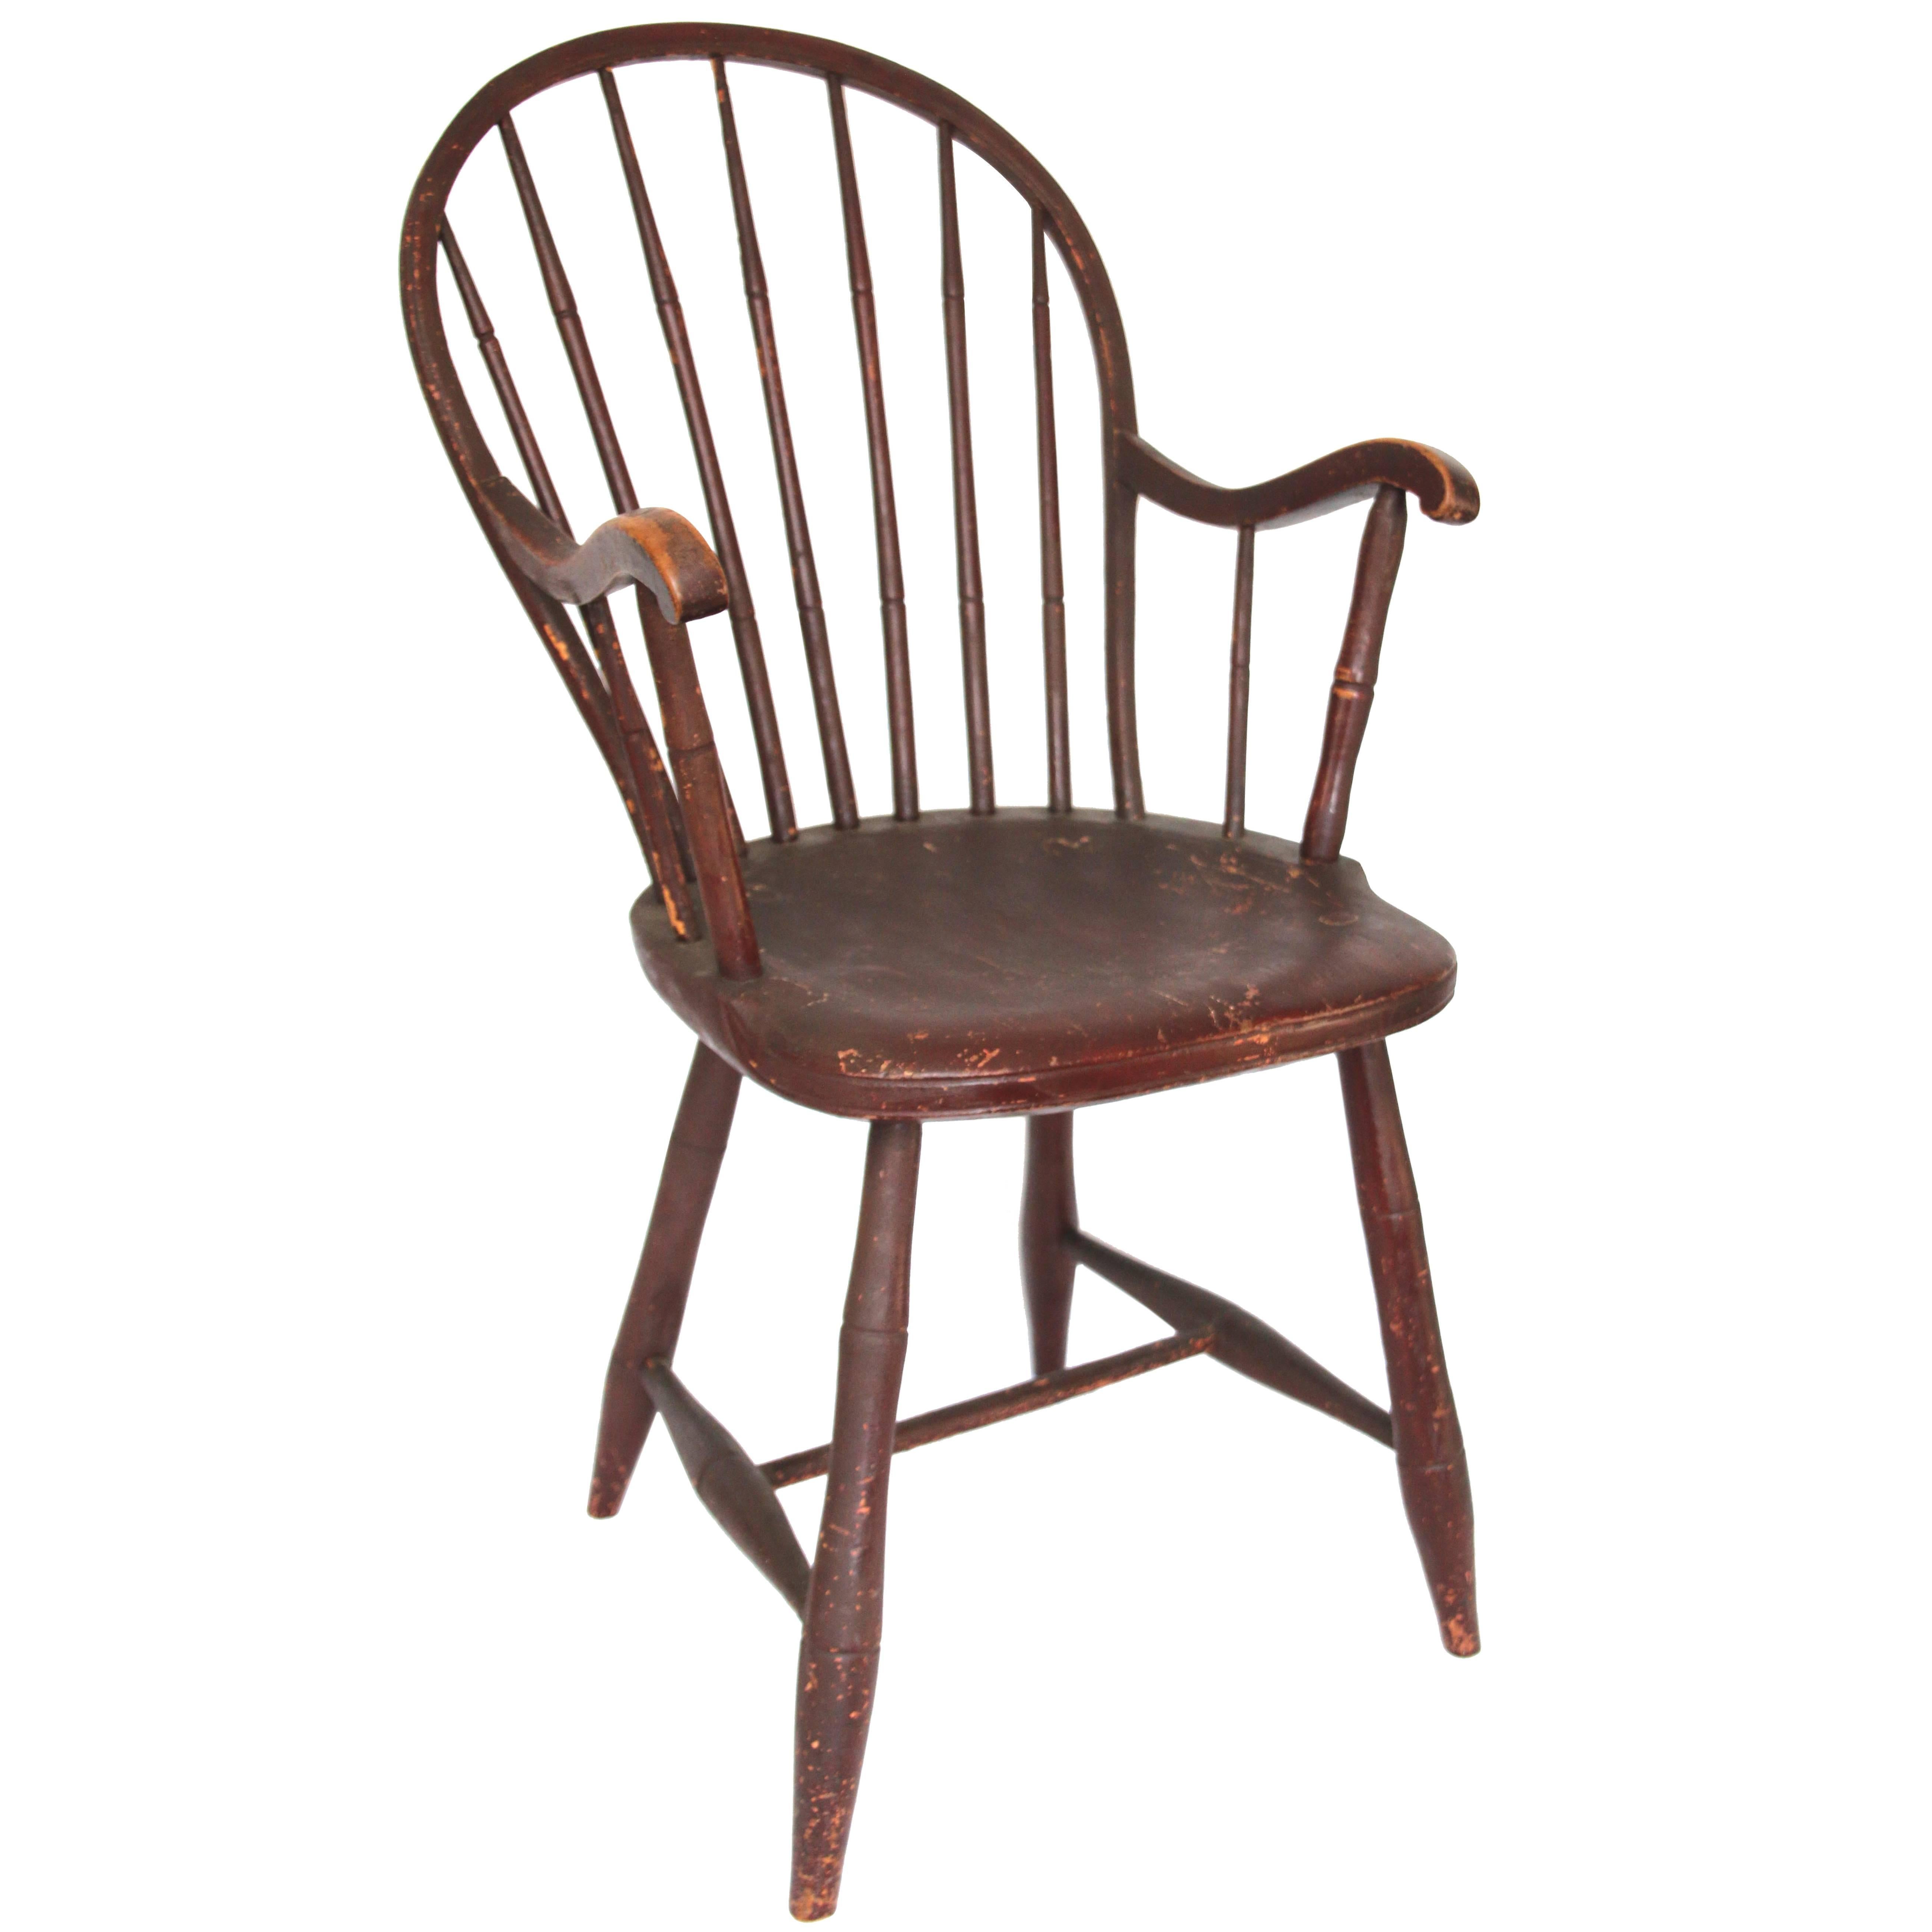 Early 19th Century Pennsylvania Oxblood Red Bowback Windsor Armchair For Sale